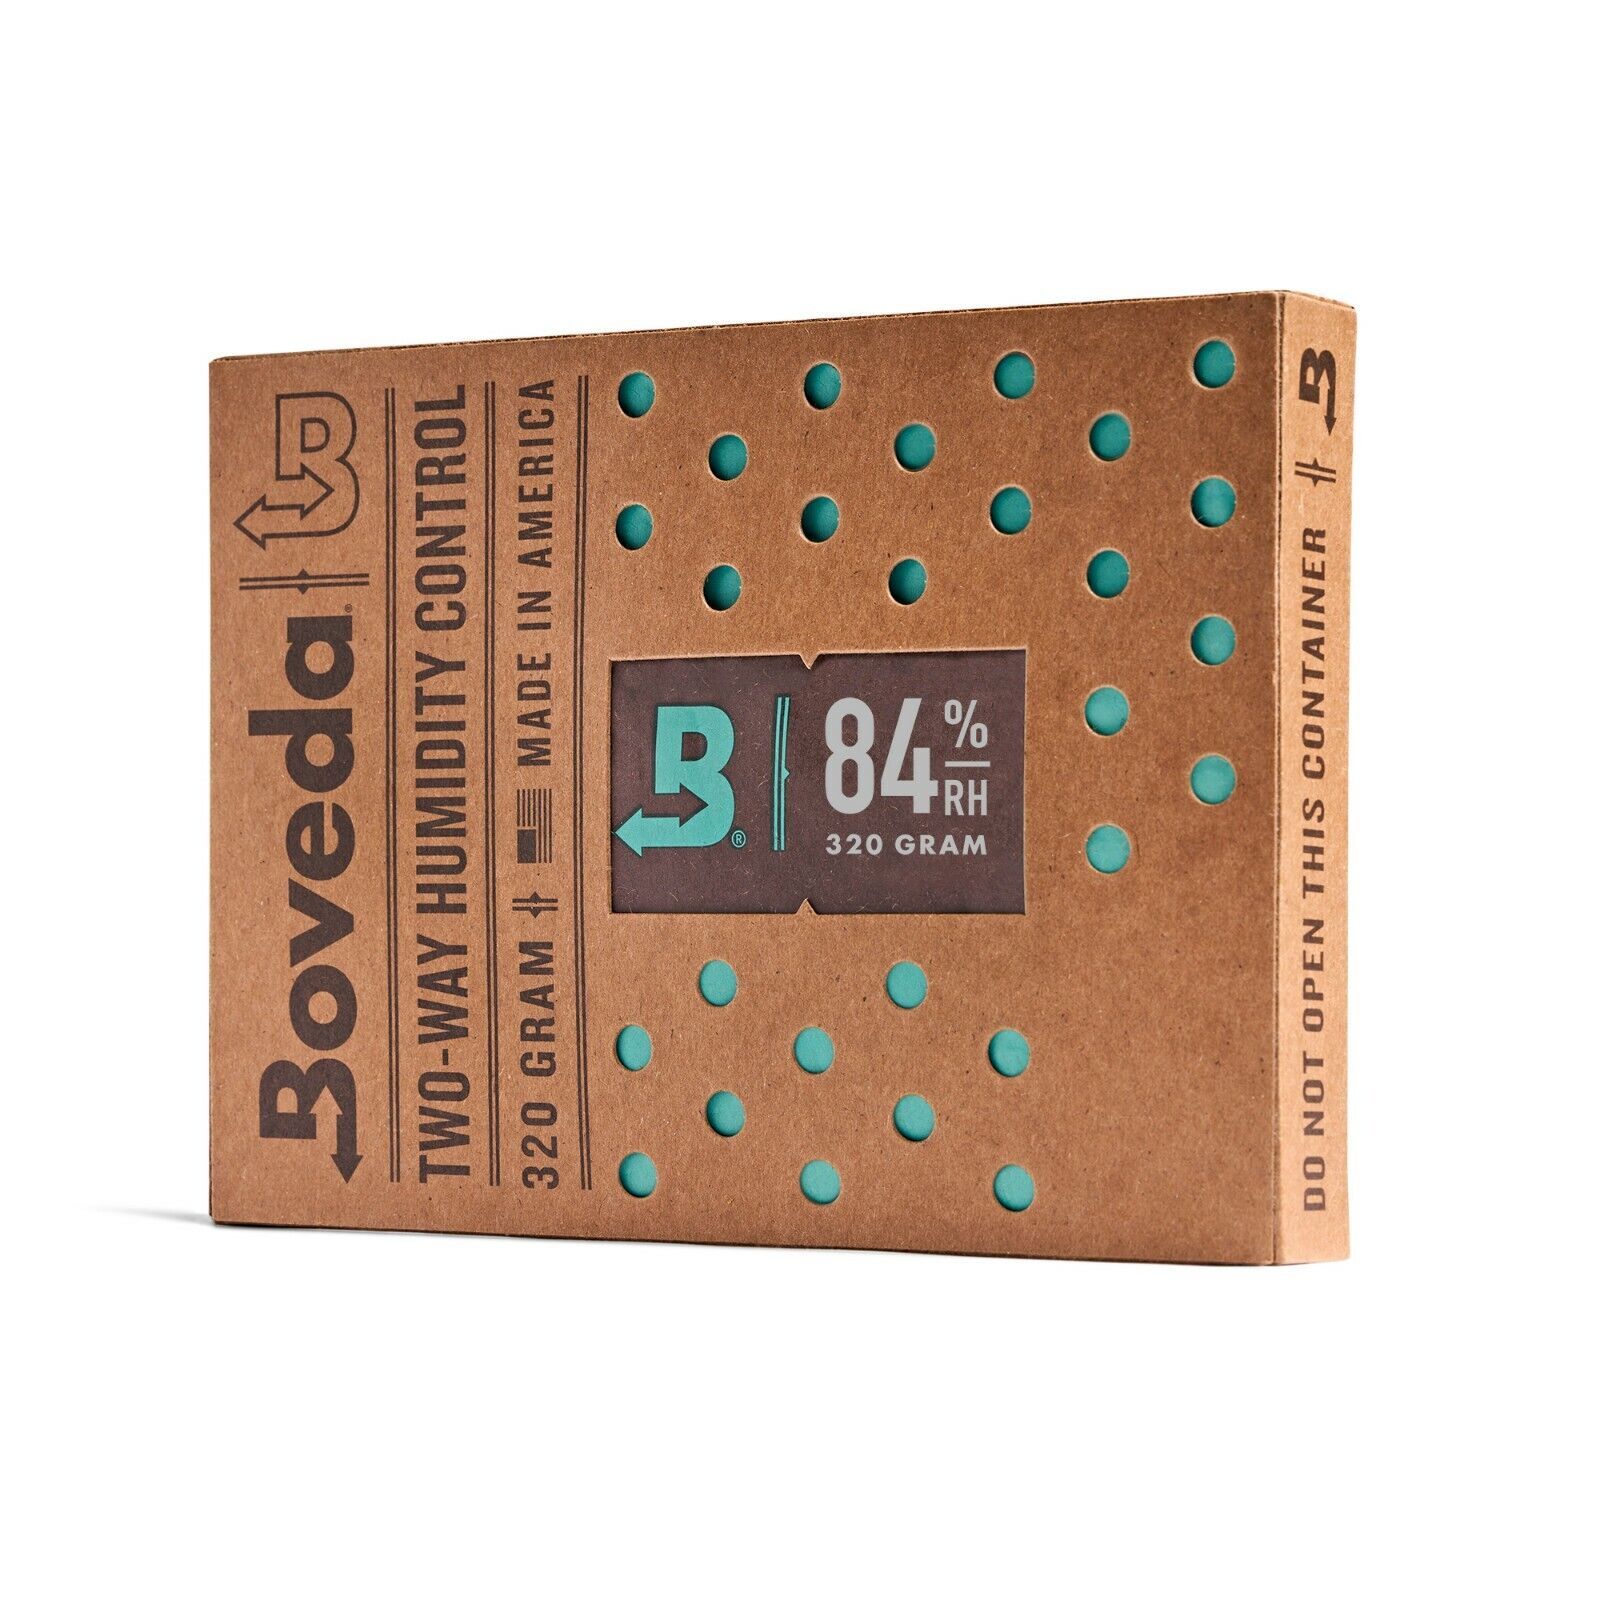 Boveda 84% RH 2-Way Humidity Control - Protects & Restores - Size 320 - 1 Count